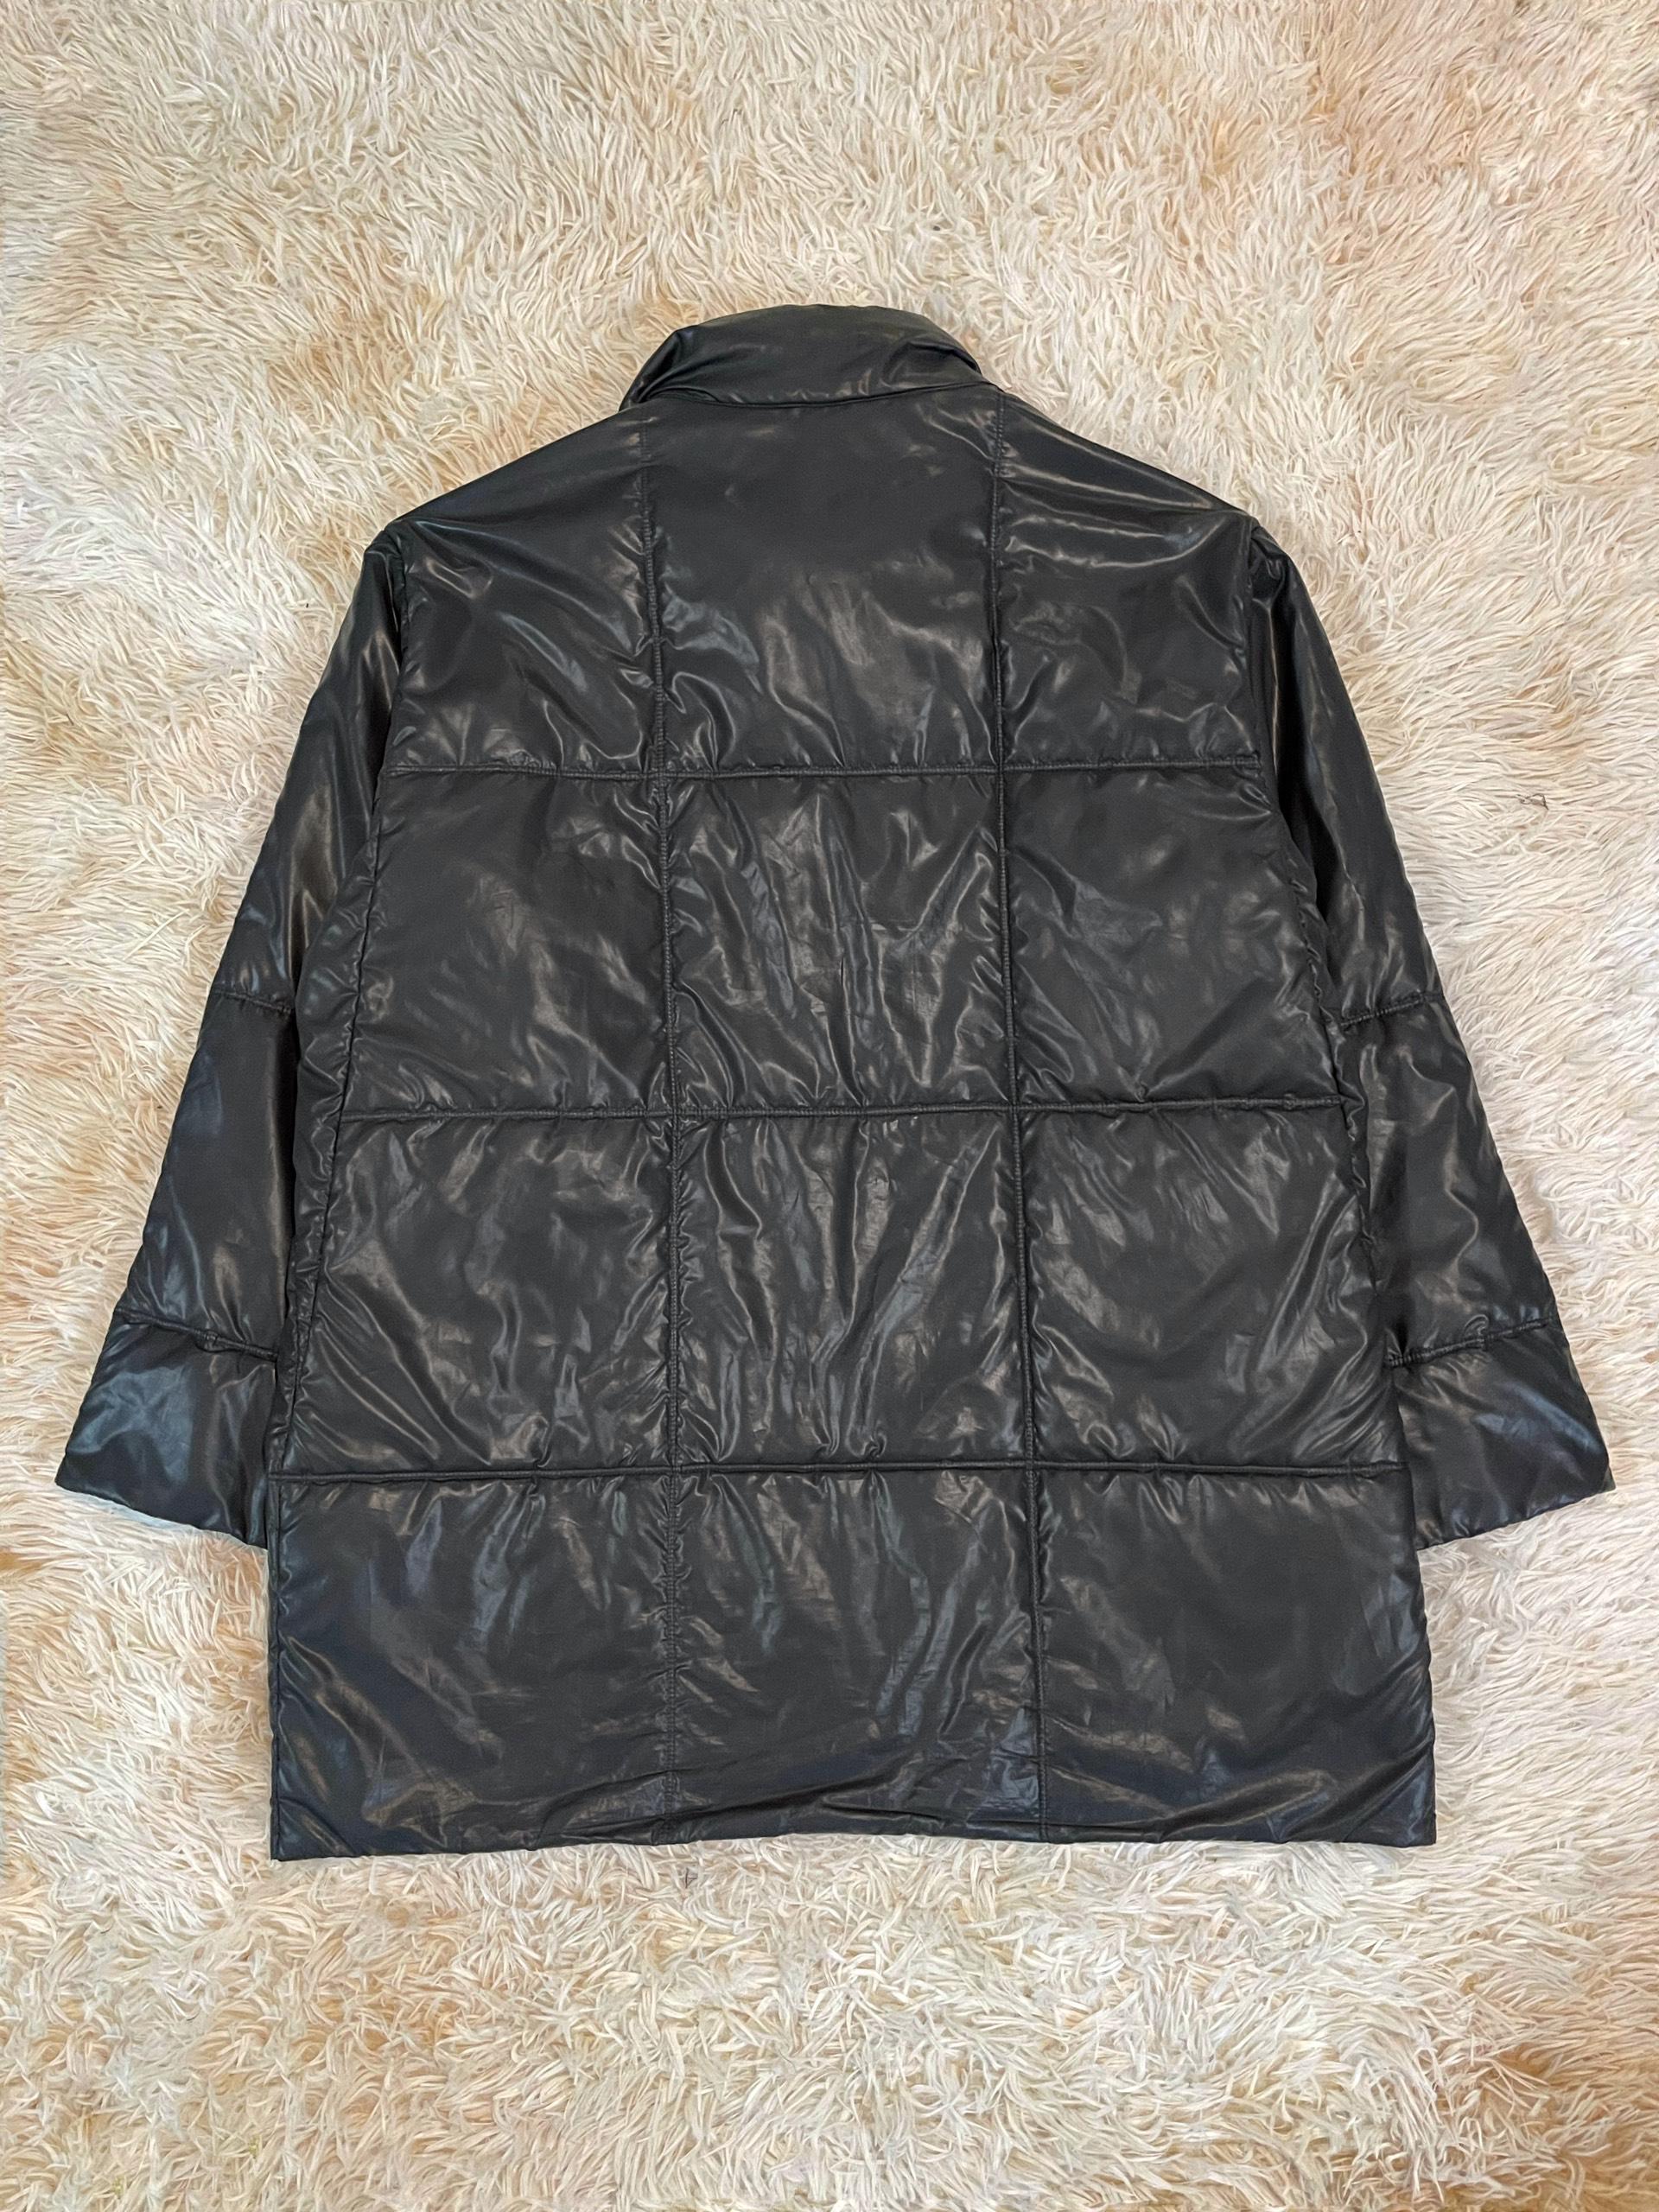 Issey MIyake F/W2001 Pillow Puffer Coat In Excellent Condition For Sale In Seattle, WA